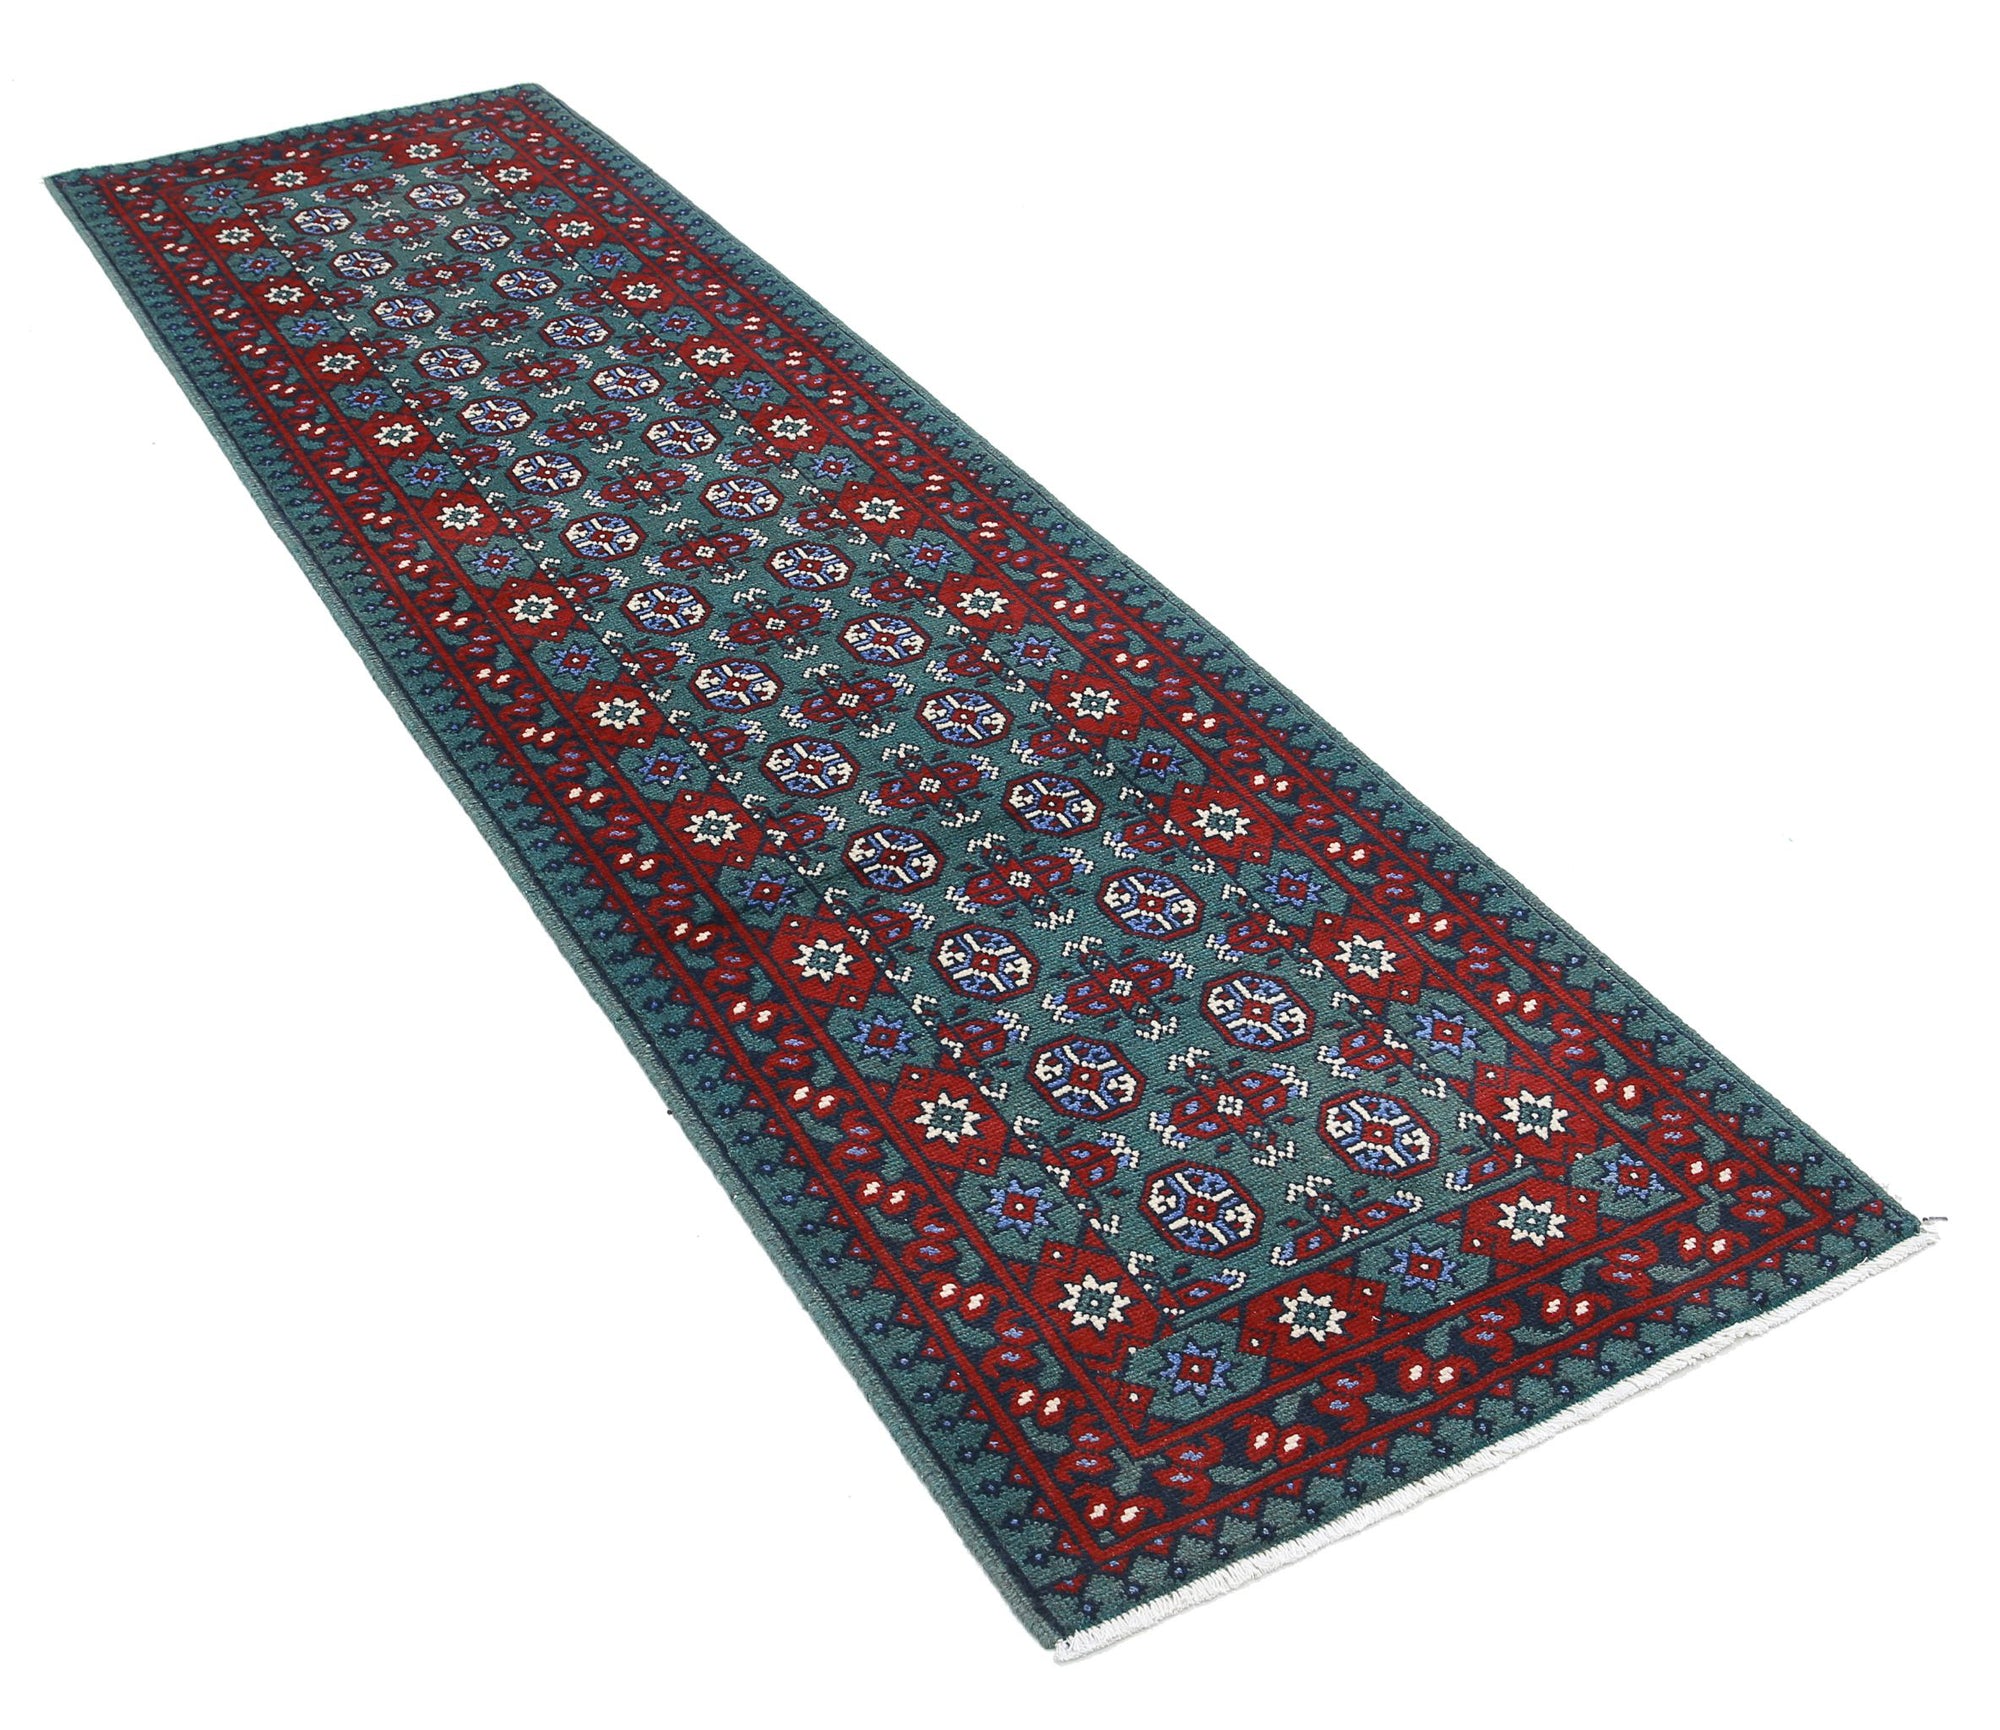 Revival-hand-knotted-gul-collection-wool-rug-5013992-1.jpg